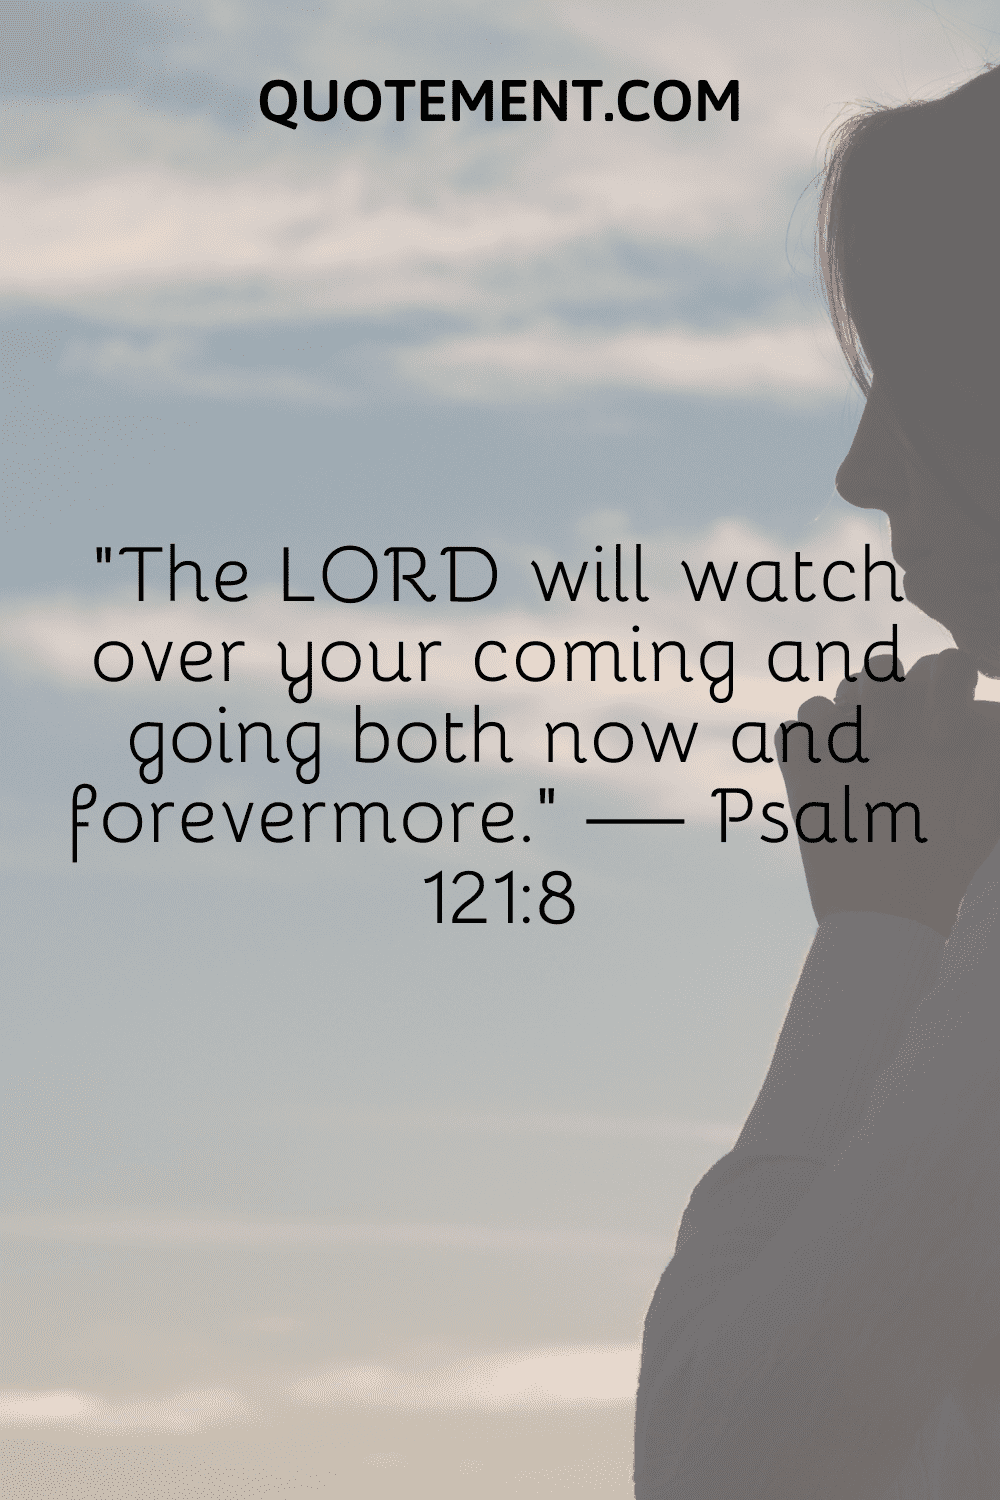 The LORD will watch over your coming and going both now and forevermore